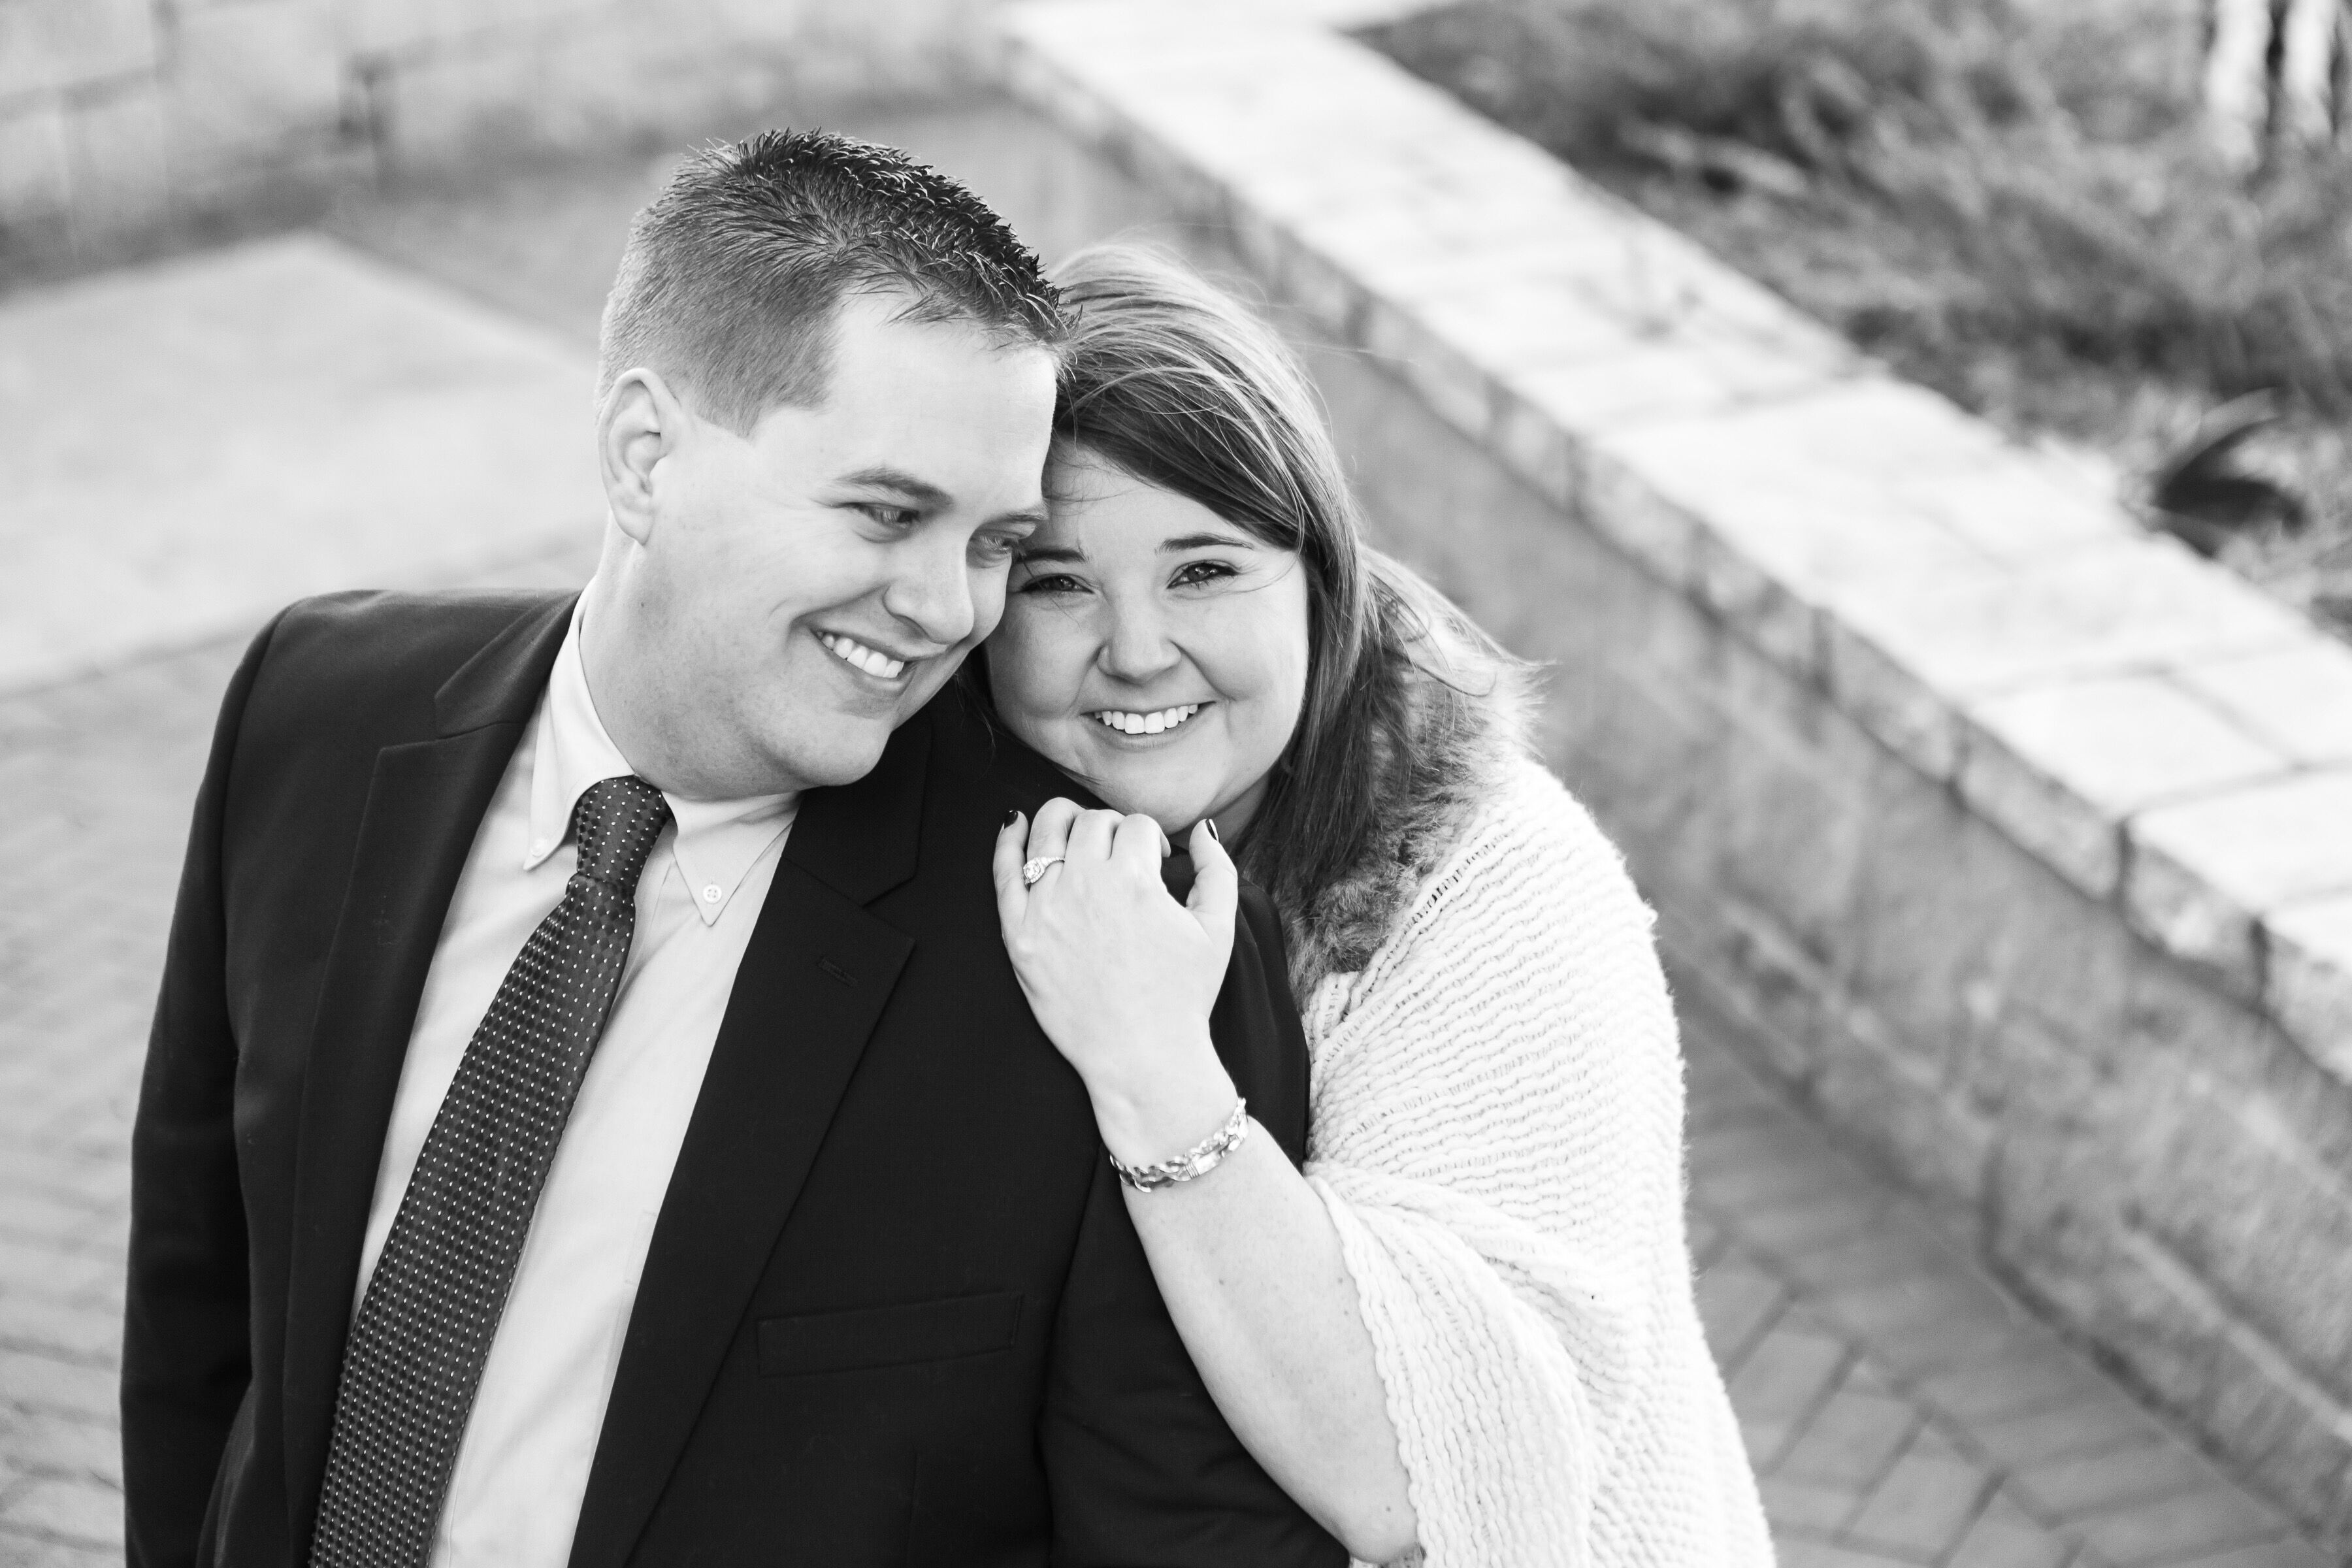 Blake Norman and Rebecca Moore's Wedding Website - The Knot